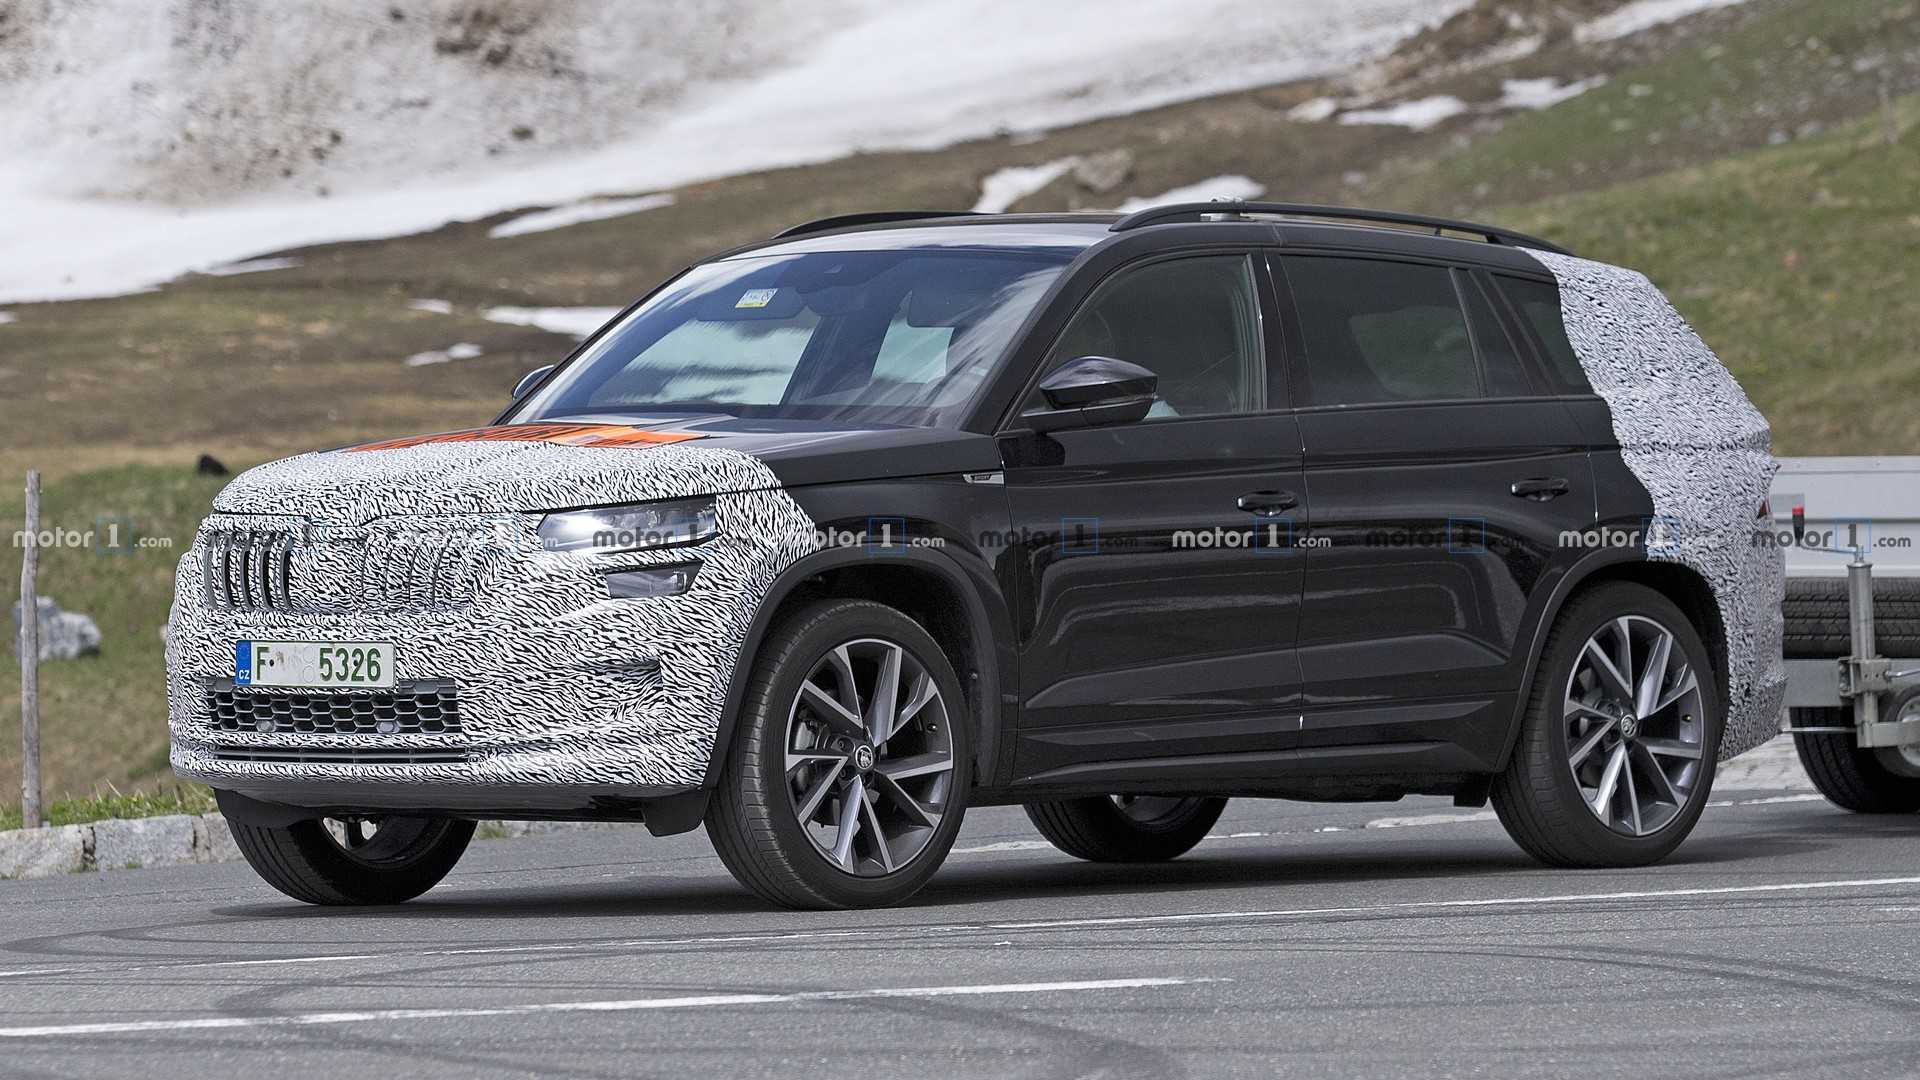 Spied Skoda Kodiaq To Undergo A Facelift May Be Launched Next Year